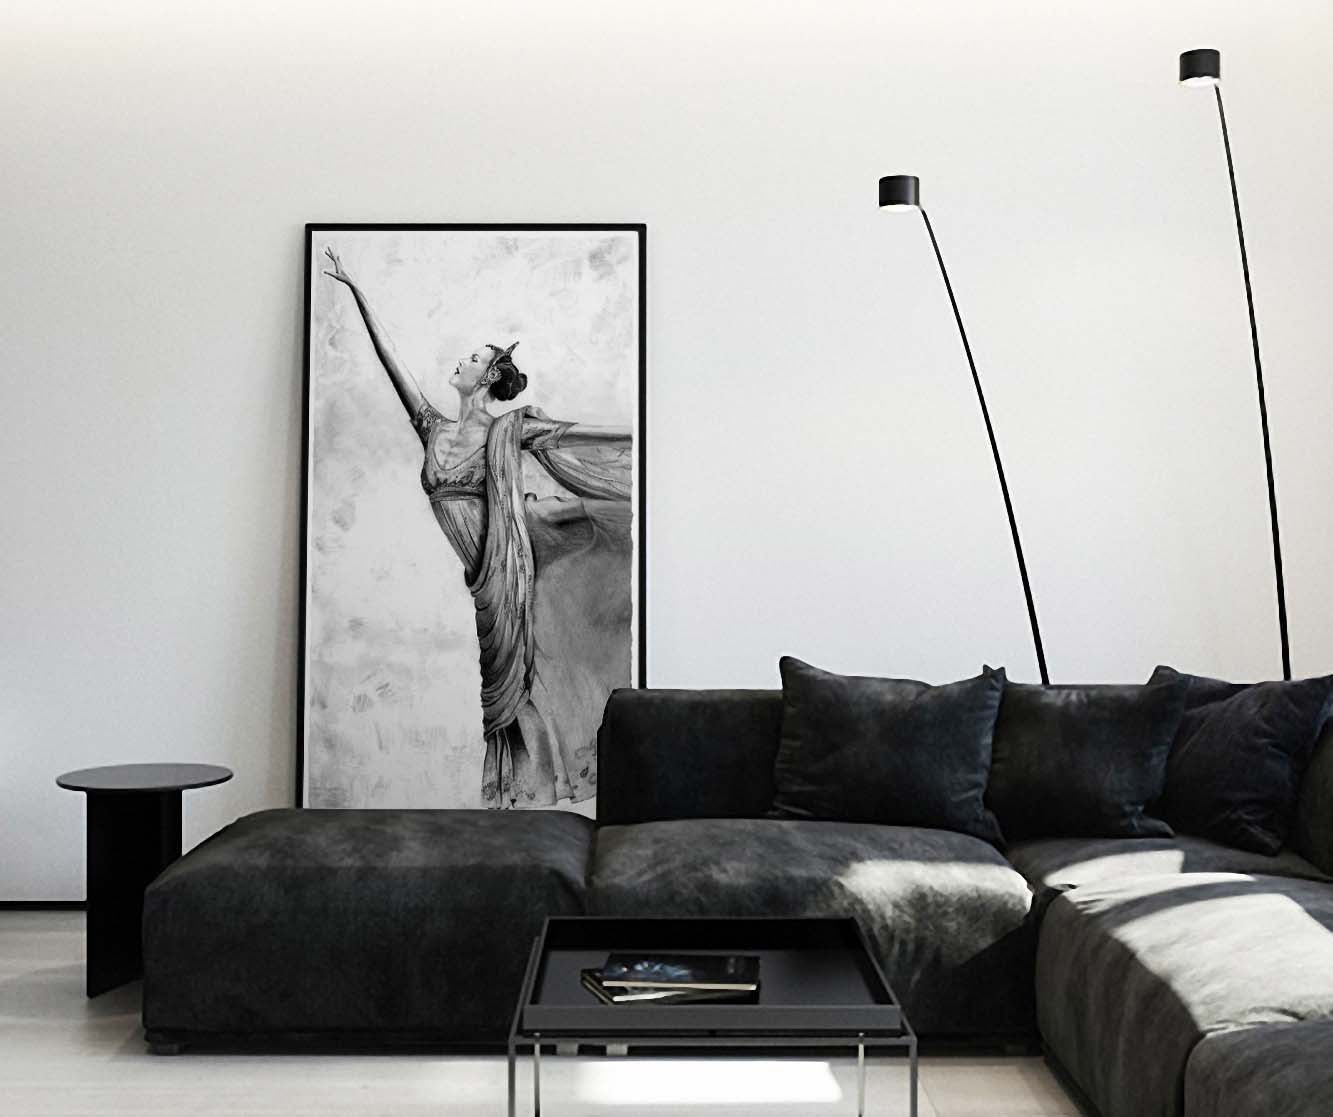 Ballerina pencil drawing by Doug LaRue leaning against wall behind a black suede leather couch